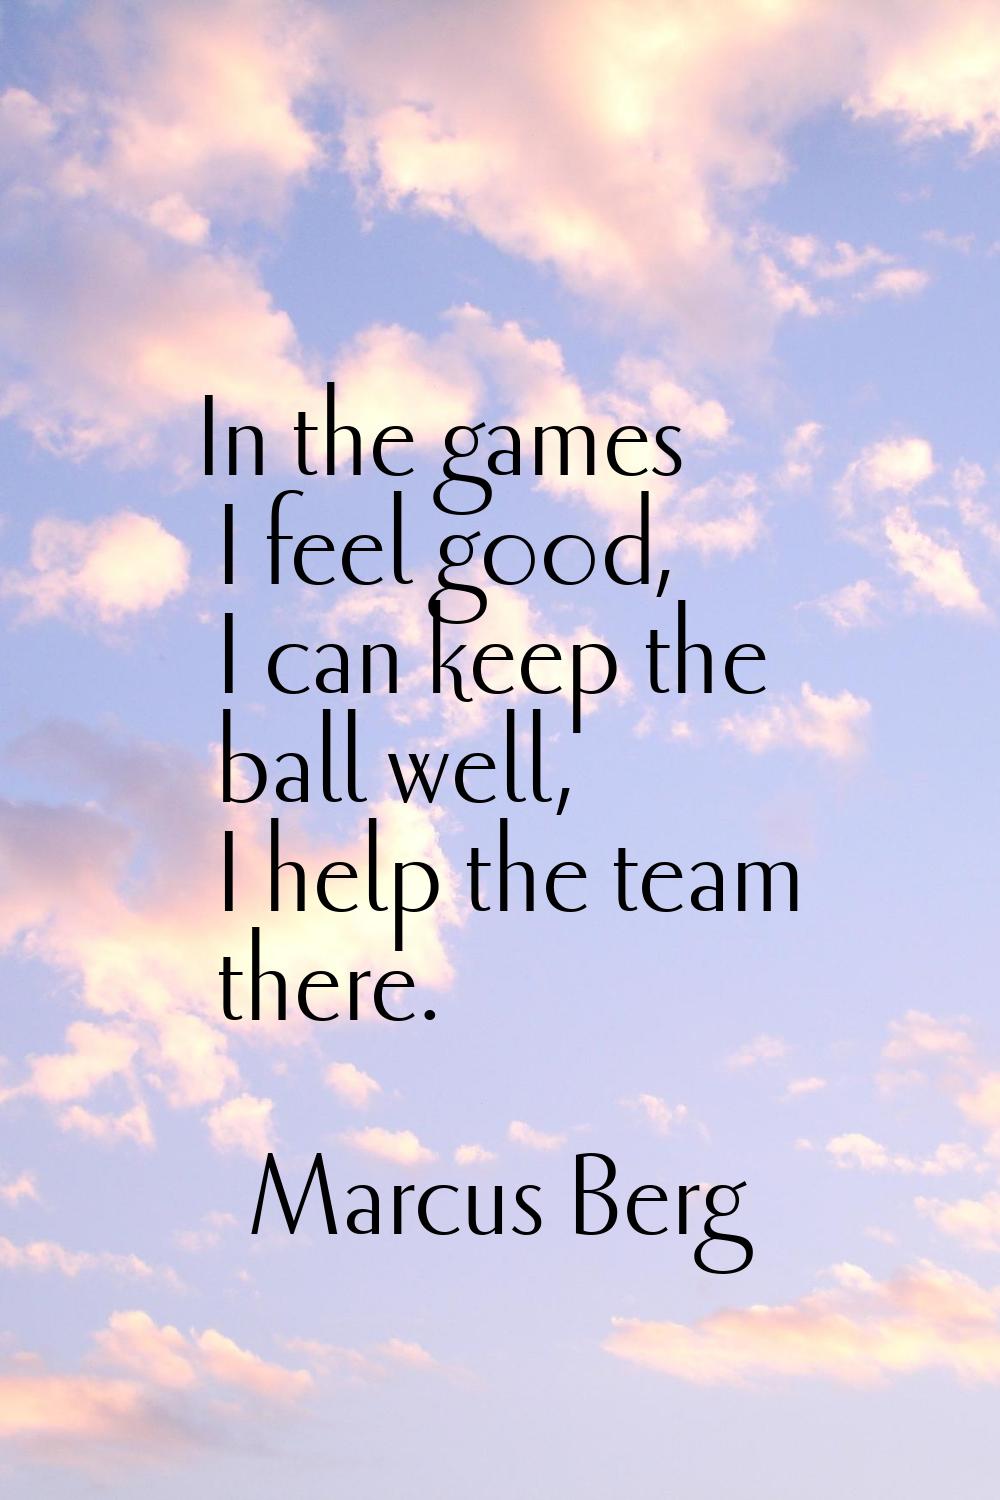 In the games I feel good, I can keep the ball well, I help the team there.